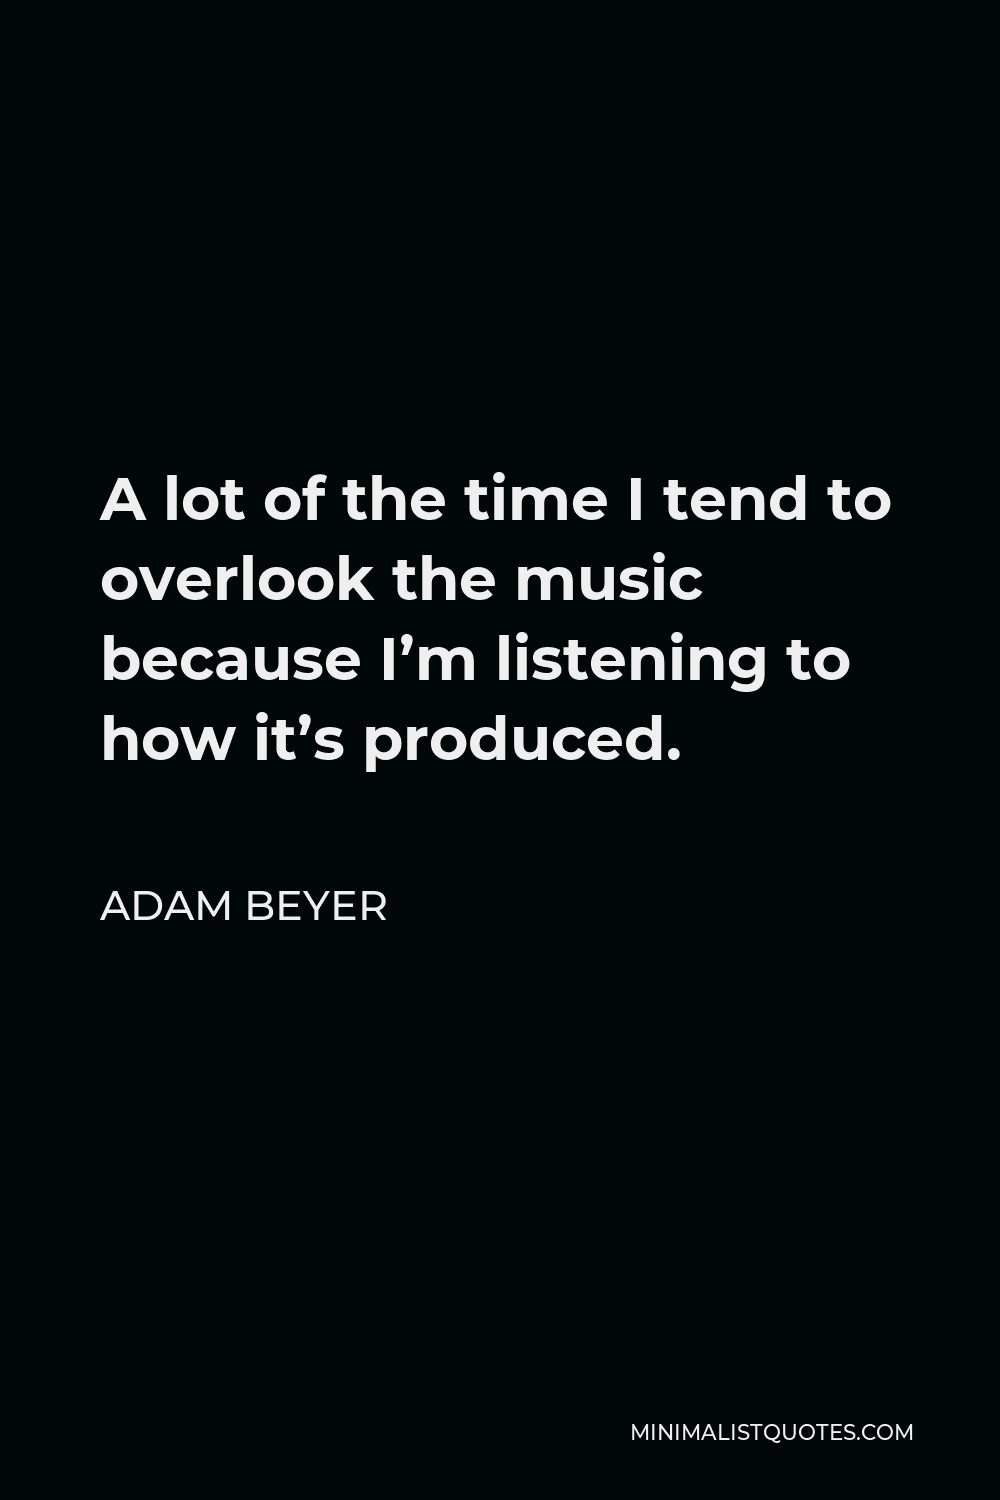 Adam Beyer Quote - A lot of the time I tend to overlook the music because I’m listening to how it’s produced.